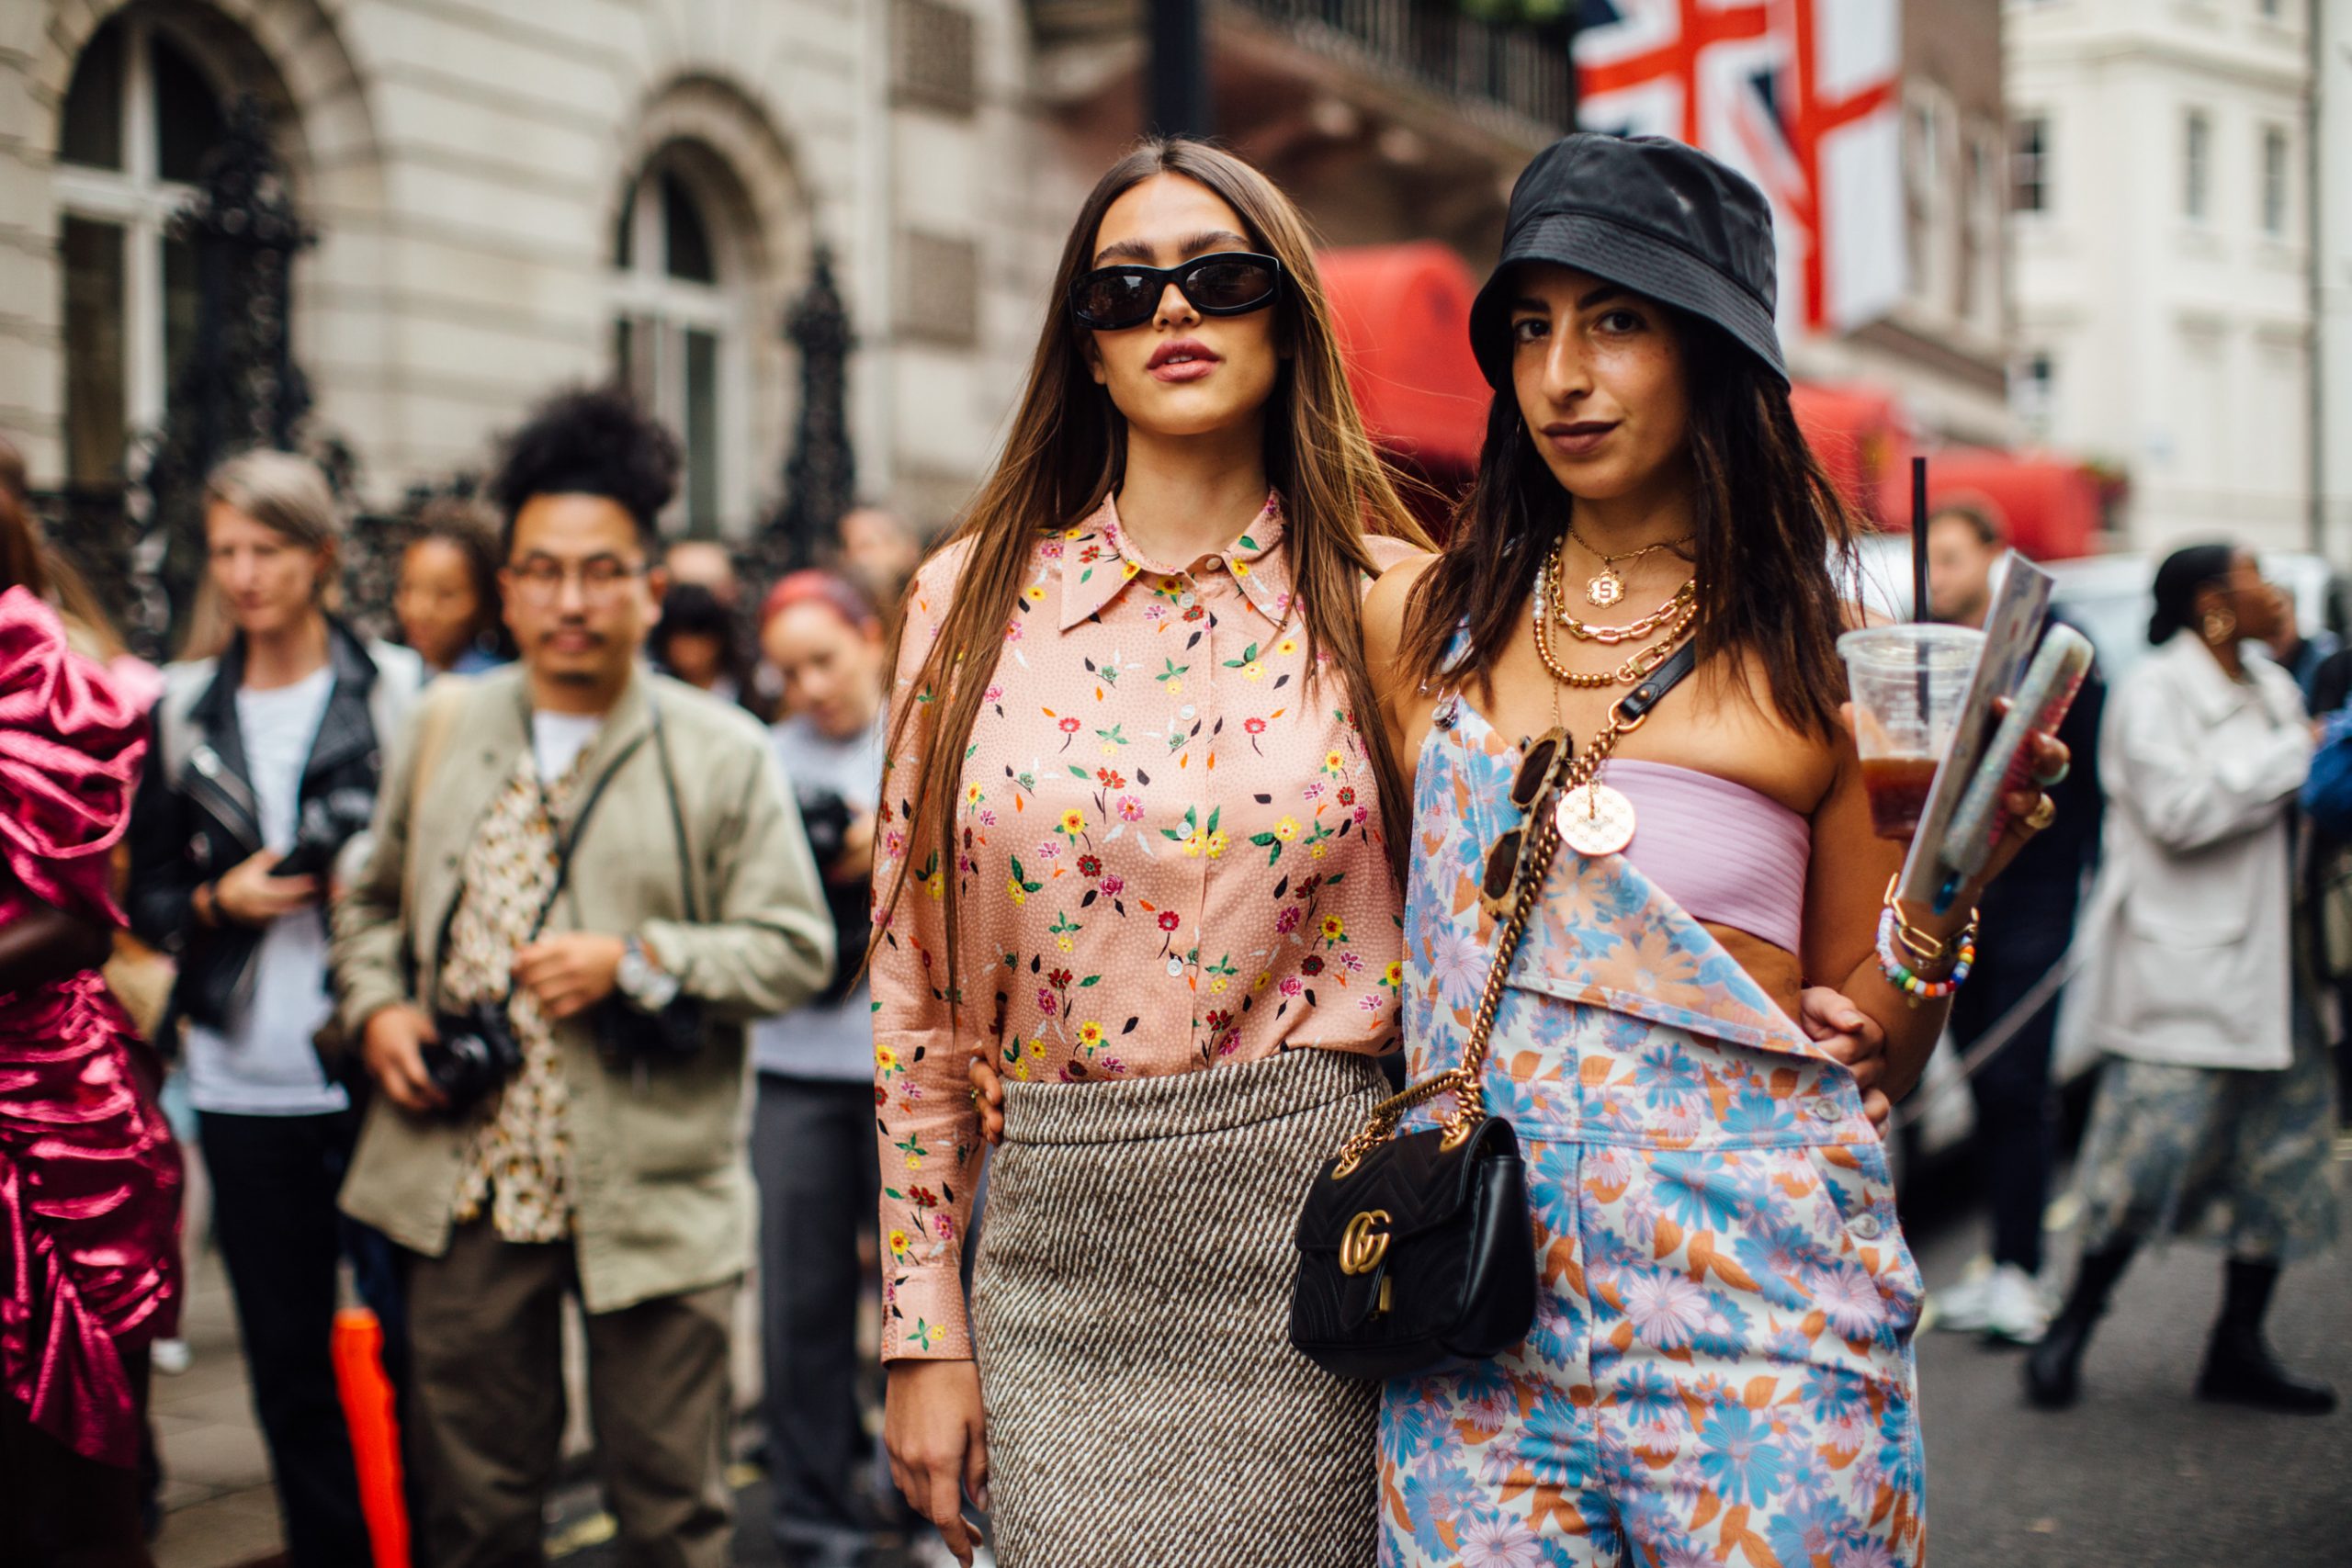 London Fashion Street Style - The Best of London Street Style | The ...